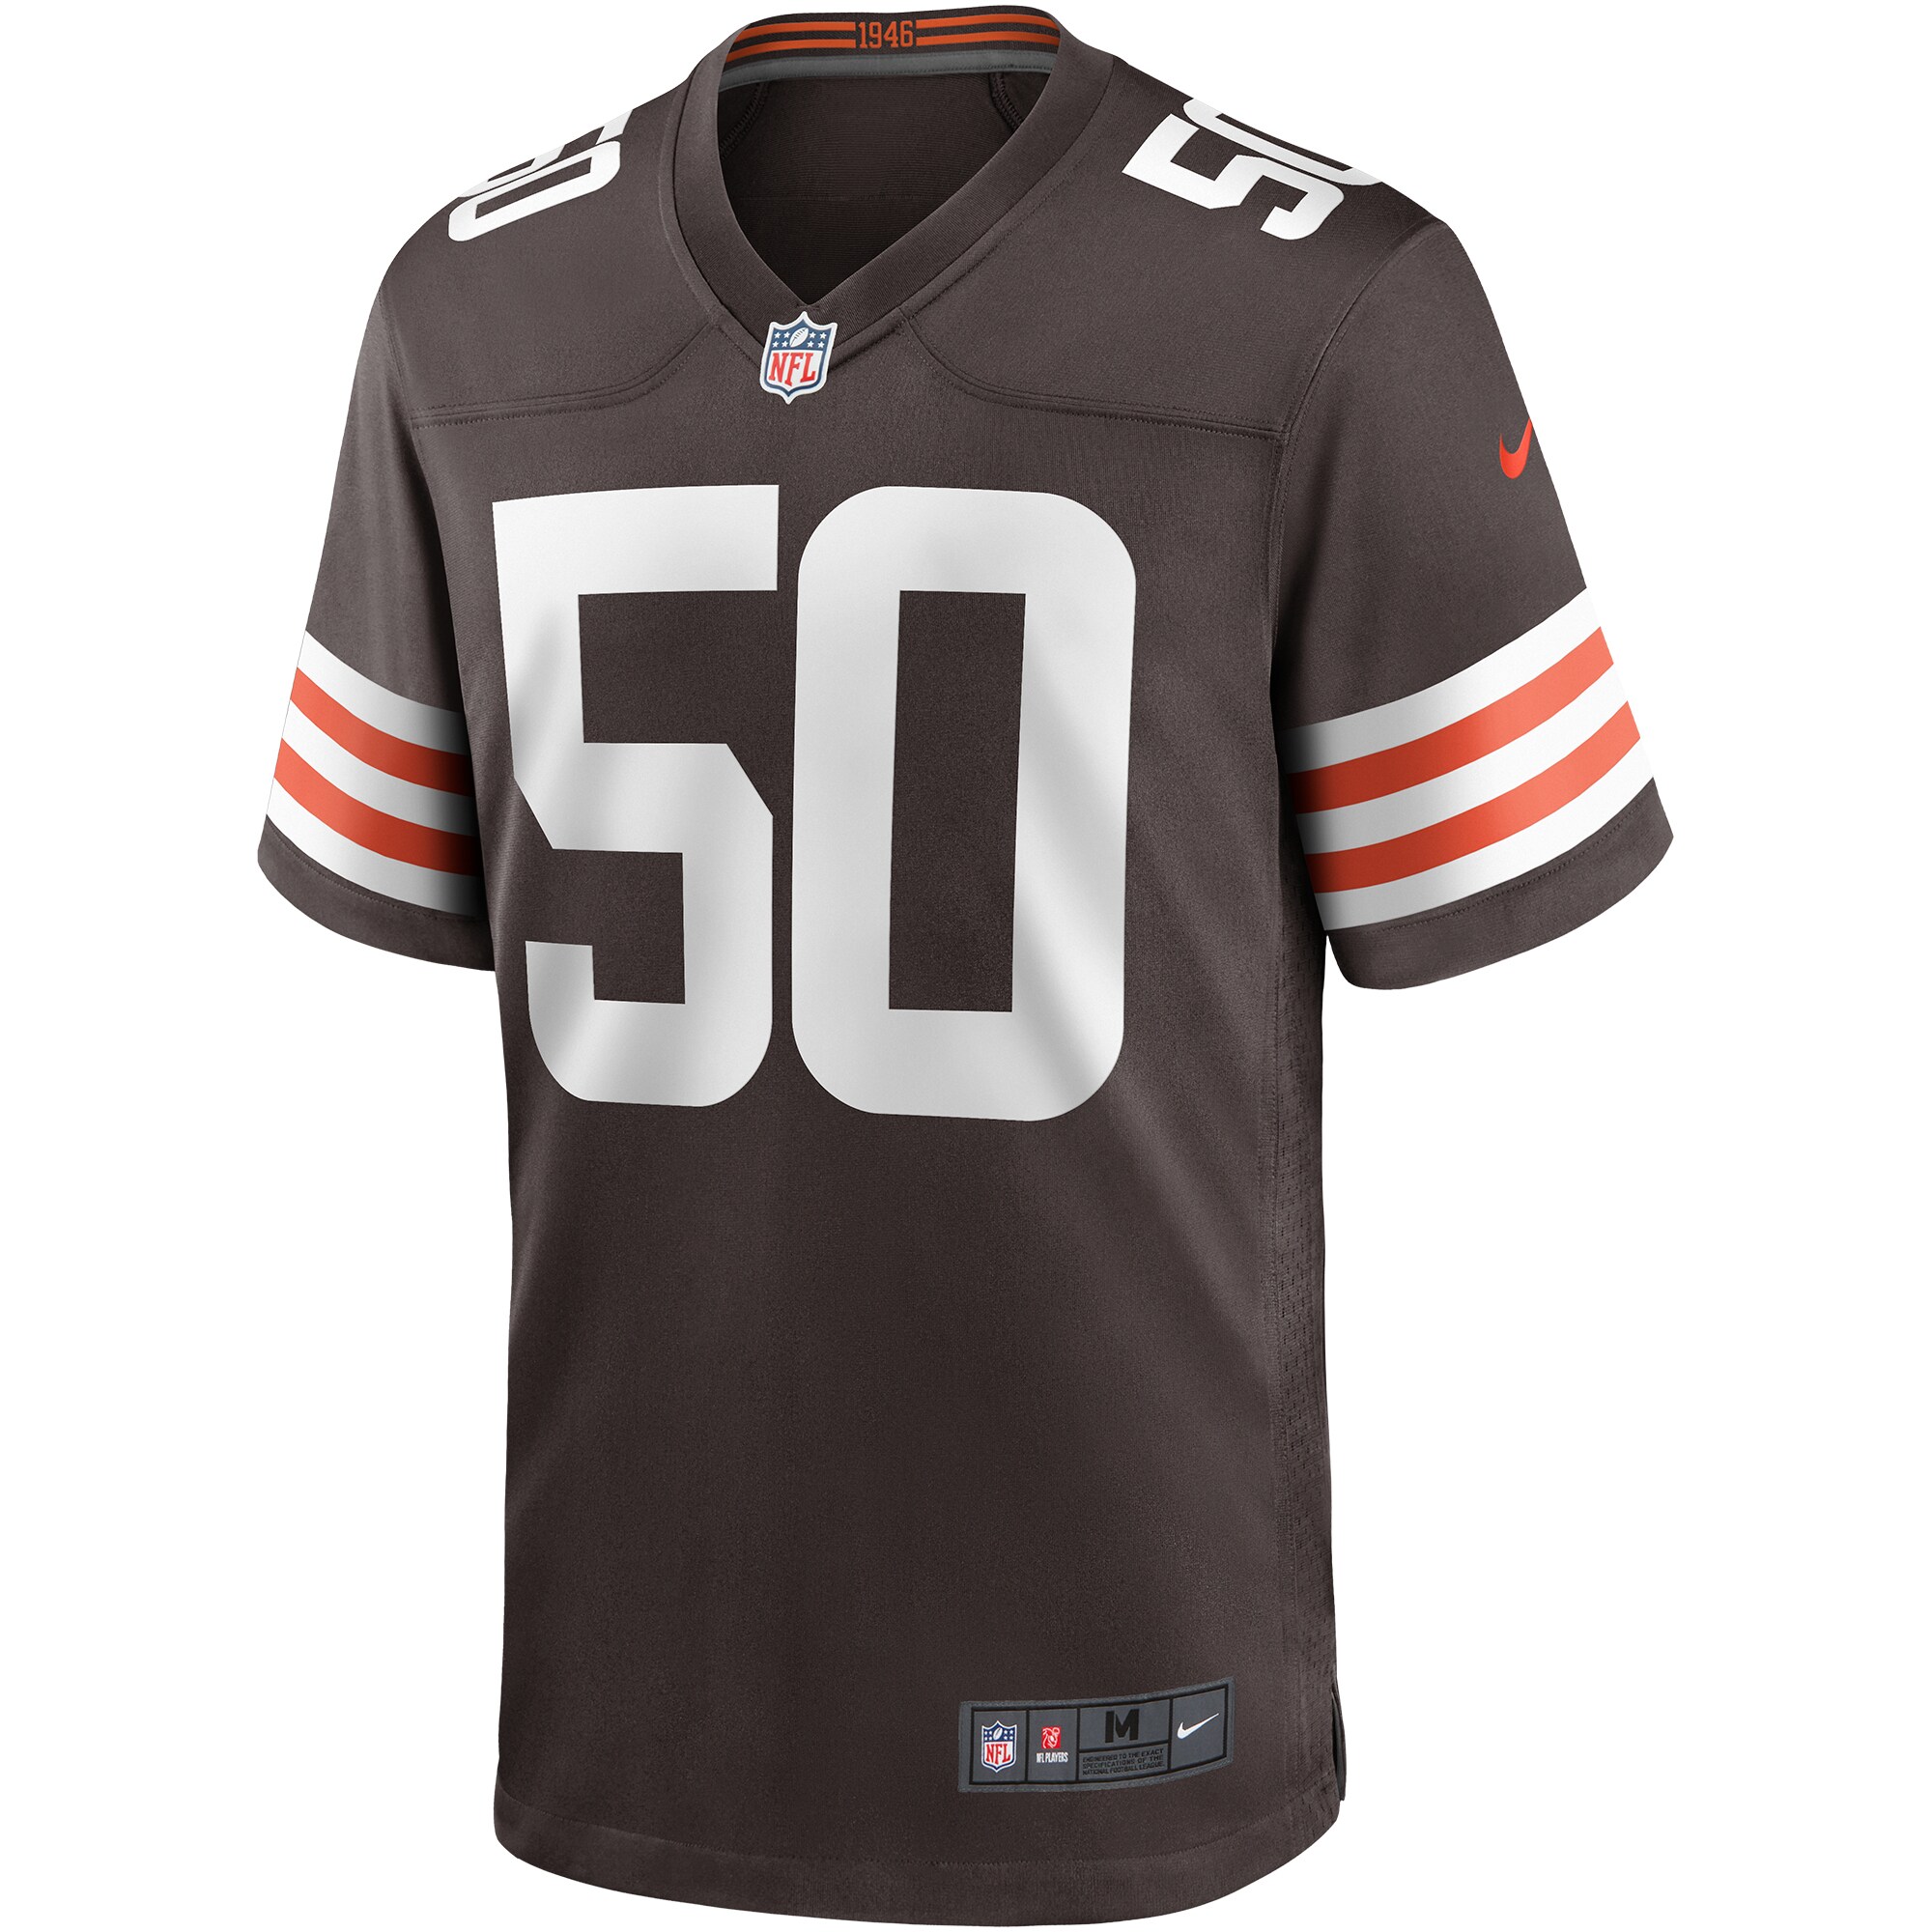 Men's Cleveland Browns Jacob Phillips Nike Brown Player Game Jersey